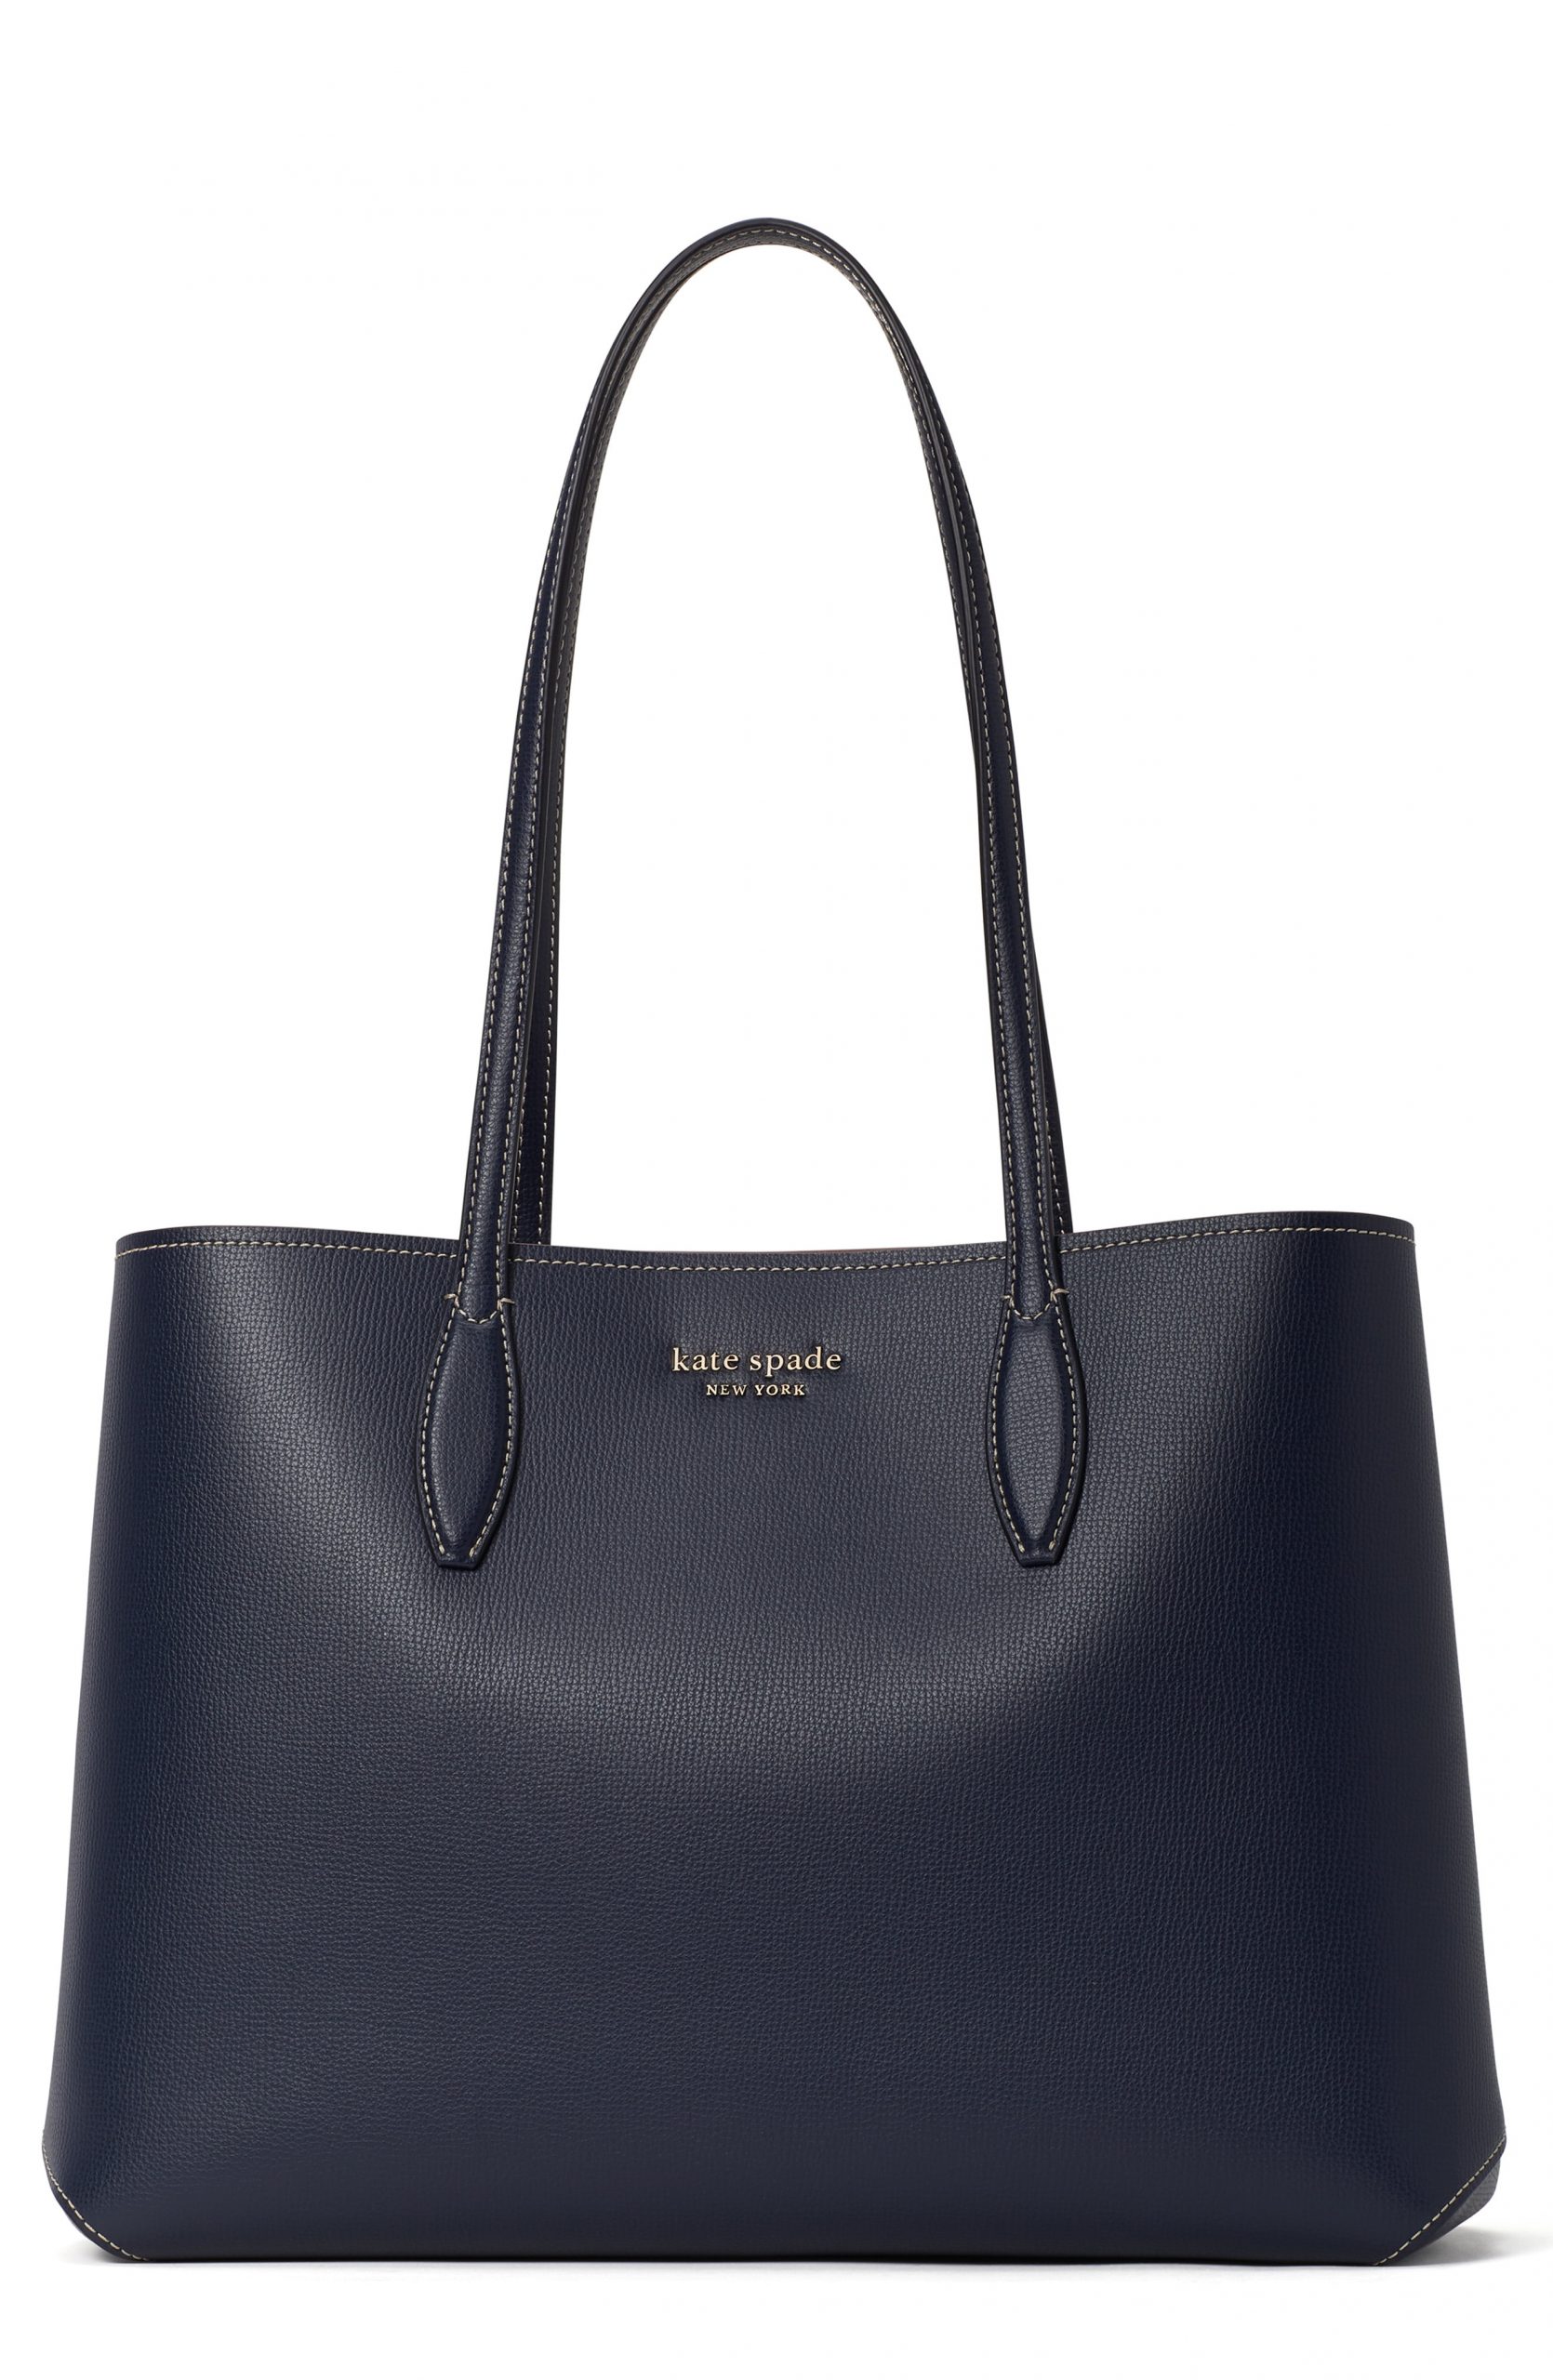 Kate Spade New York All Day Large Leather Tote - Blue | Fashion Gone Rogue